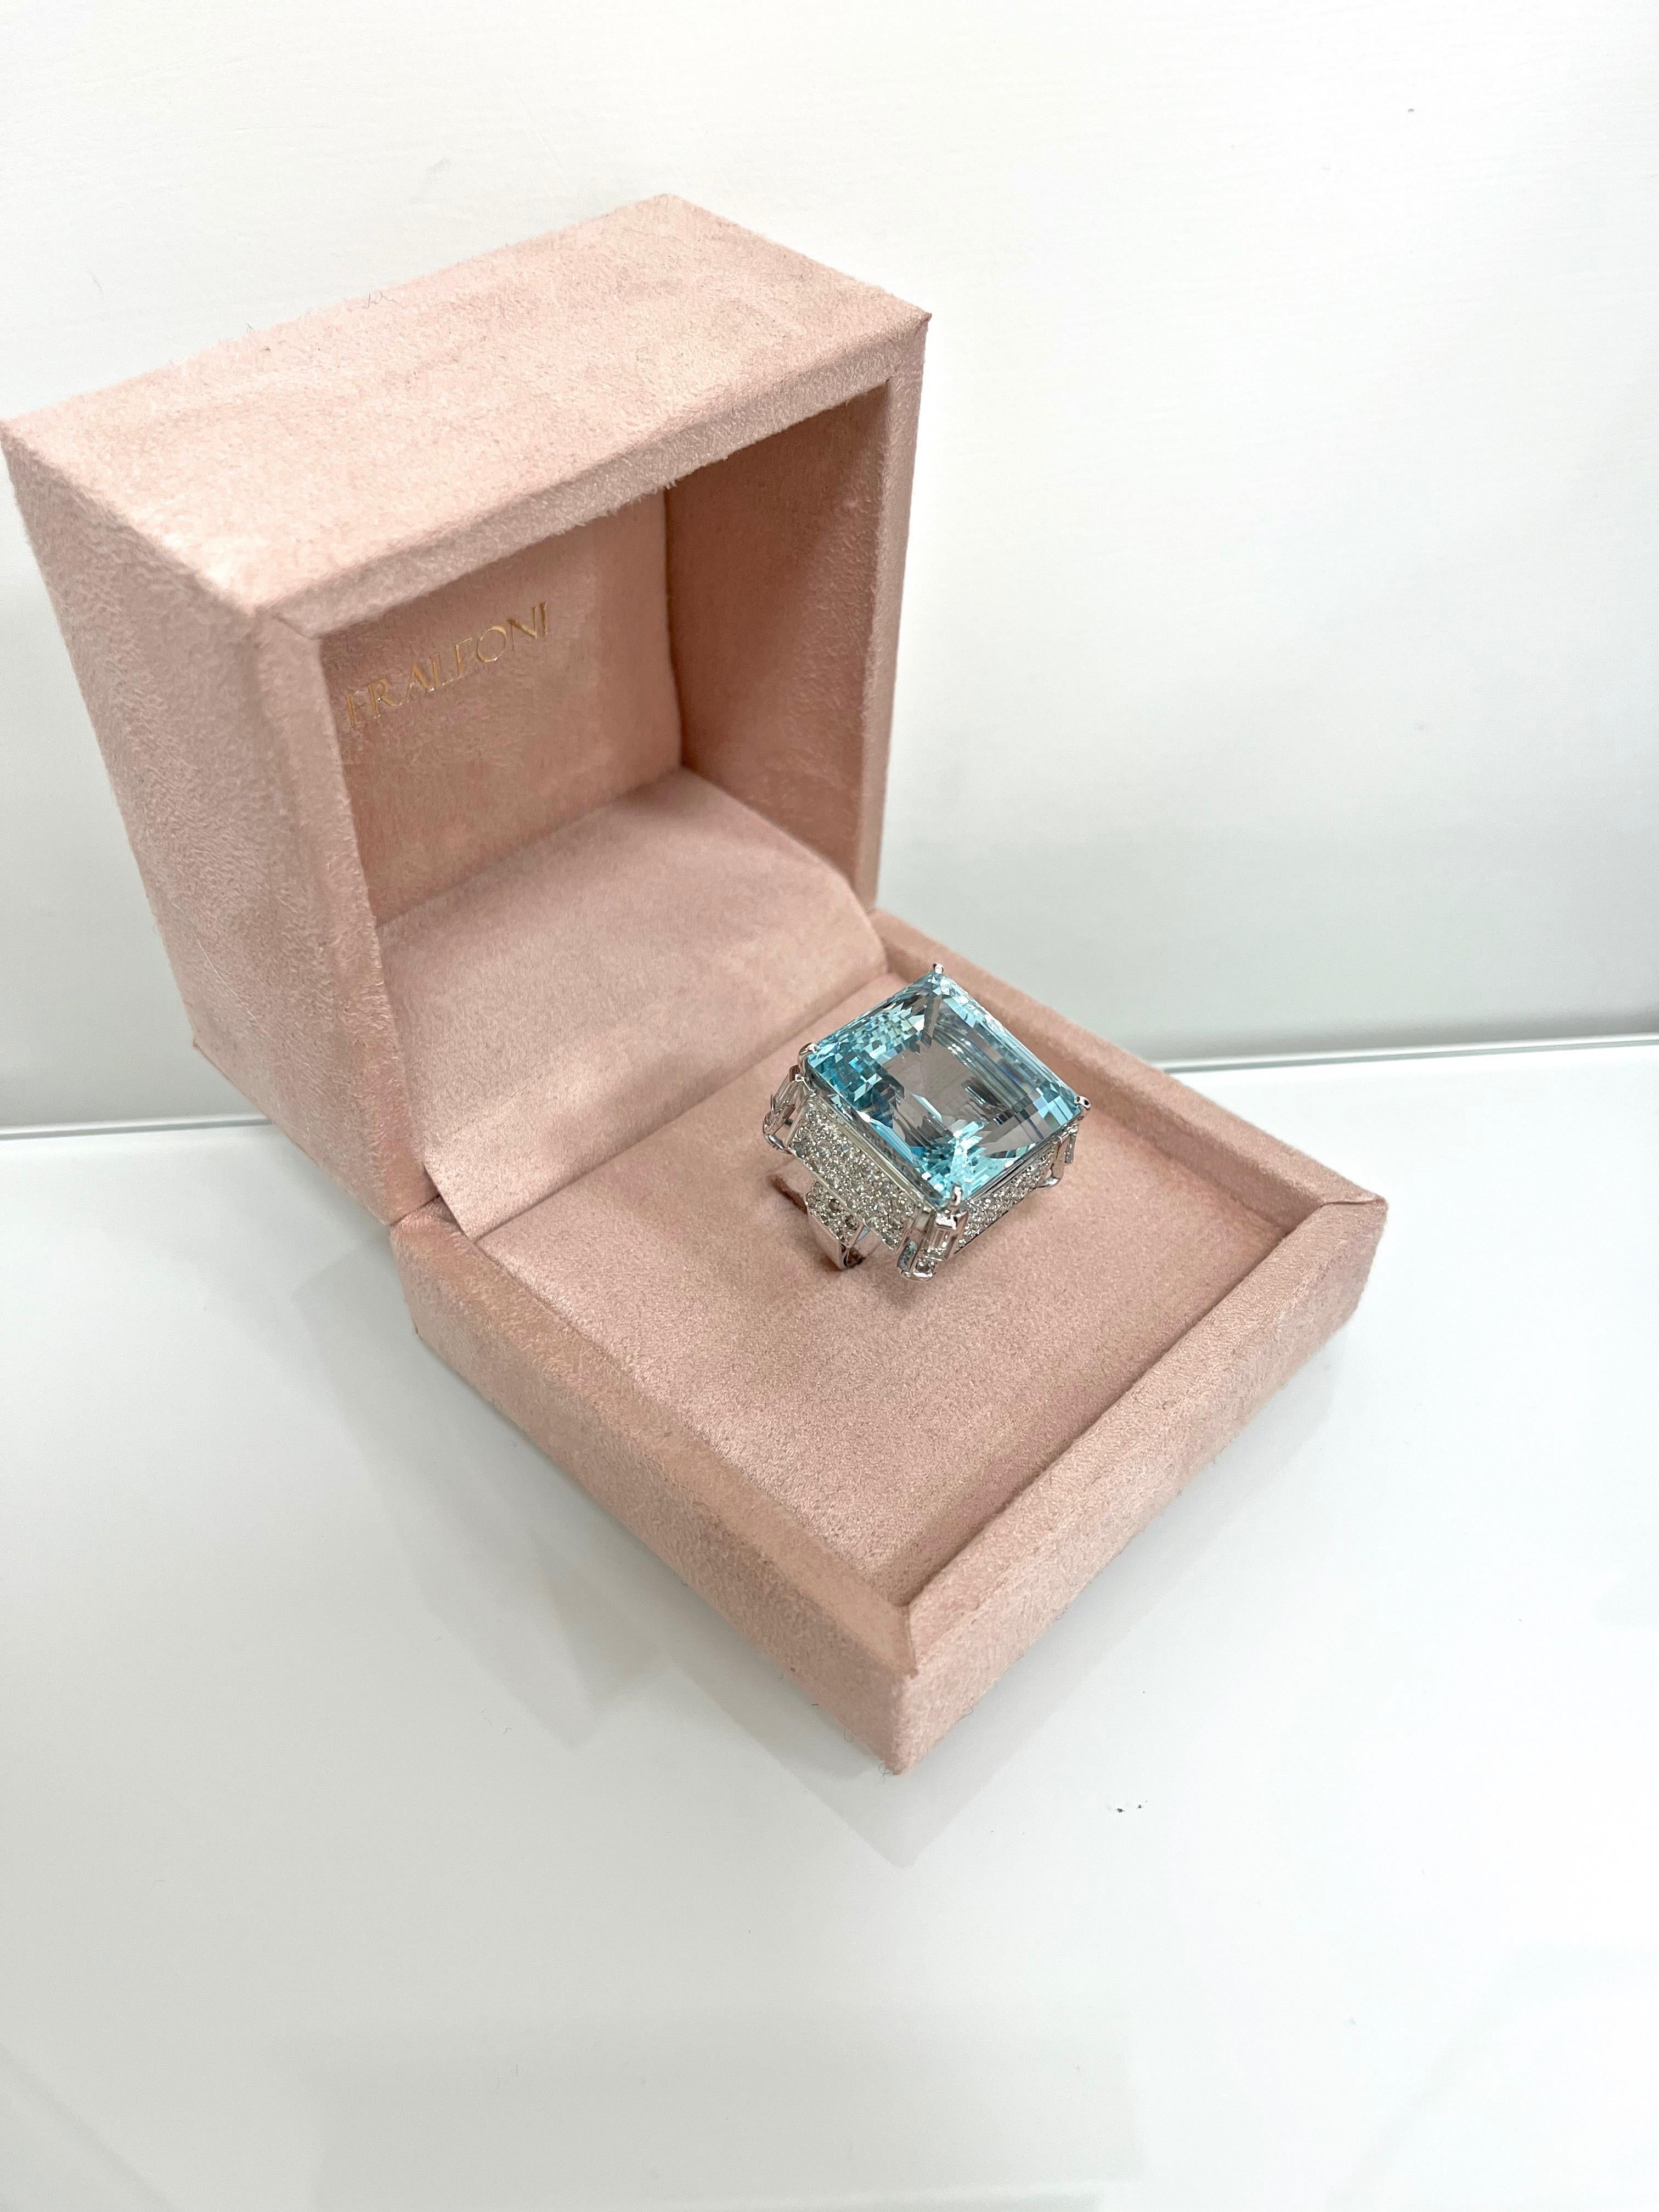 18 kt. white gold cocktail ring with round-cut and teps-cut diamonds, and aquamarine.
This impressive ring is hand-made in Italy.
The aquamarine is framed with diamonds, making this statement ring even more outstanding.
2010 ca.
One of a kind